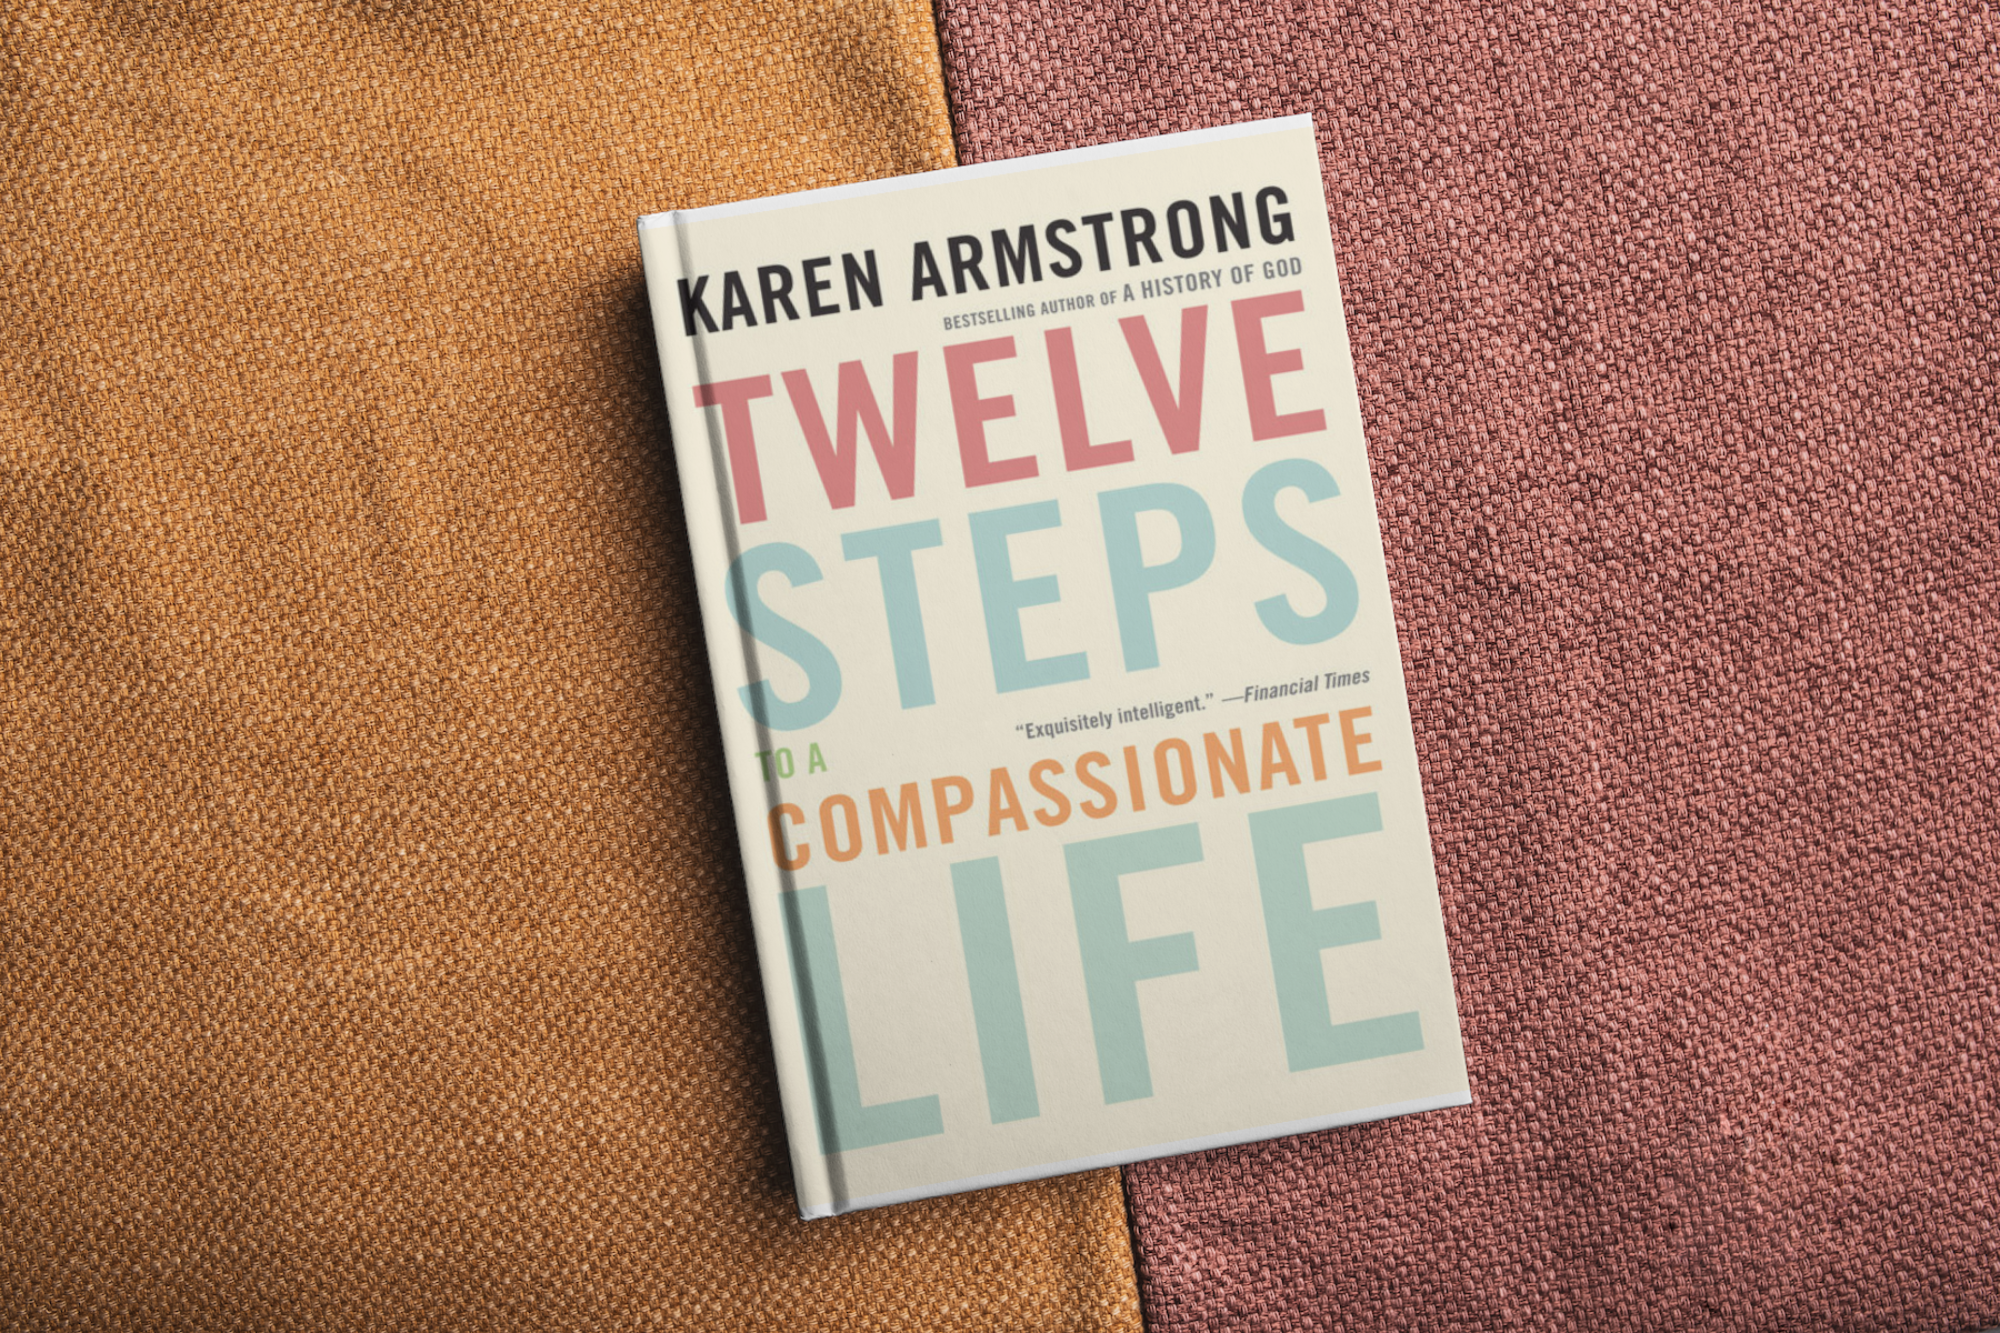 A mockup of Karen's book "12 Steps to a Compassionate Life"